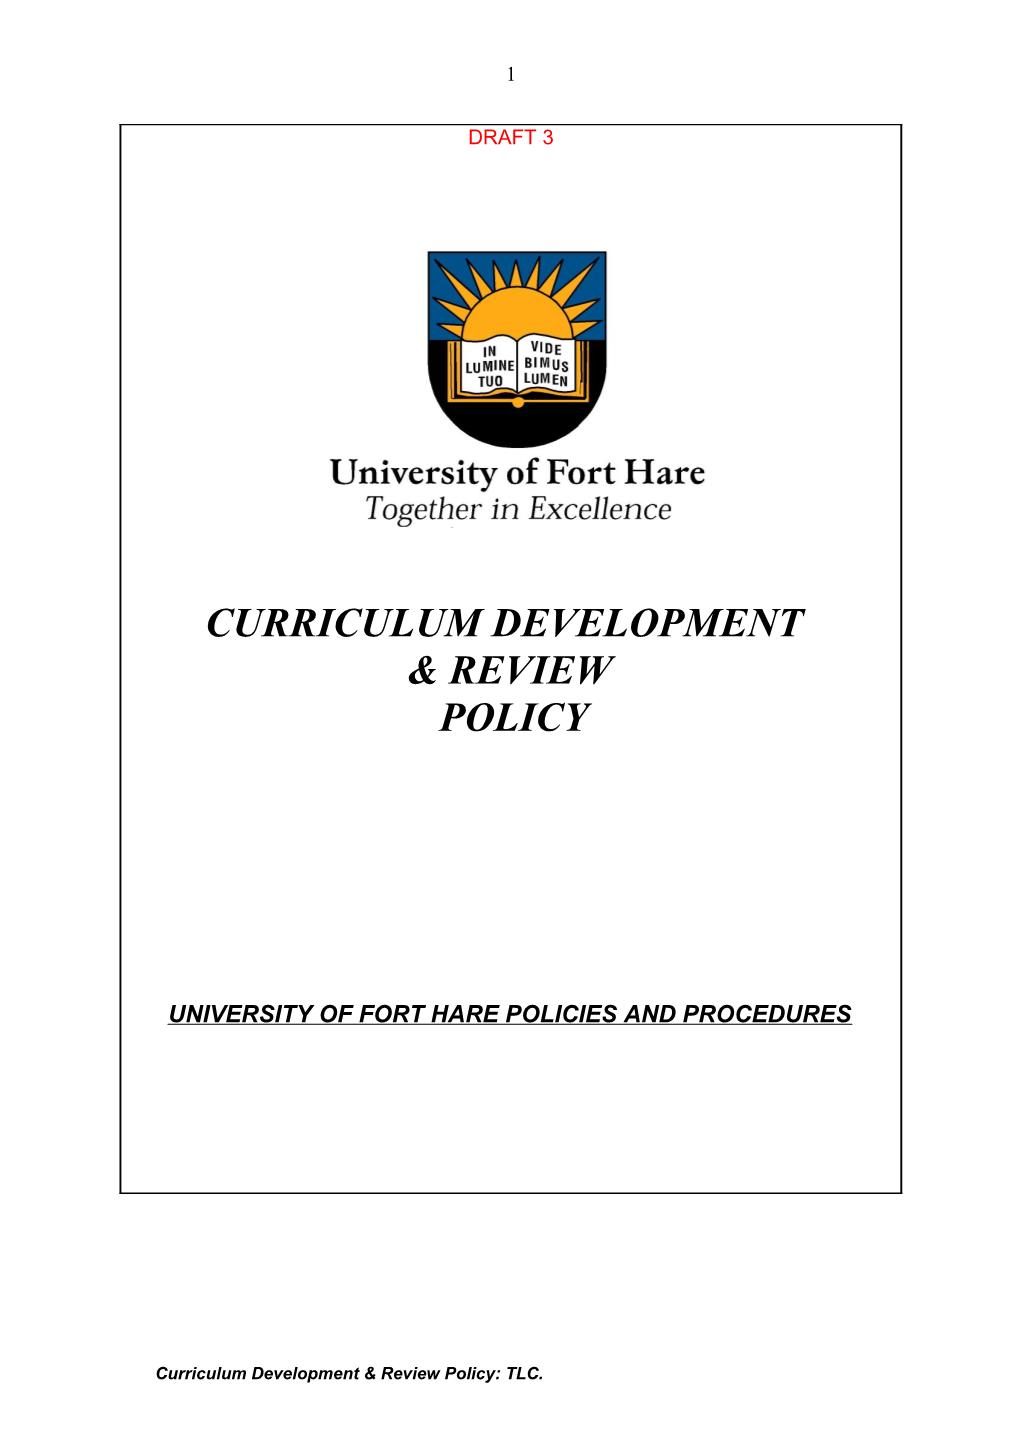 University of Fort Hare Policies and Procedures